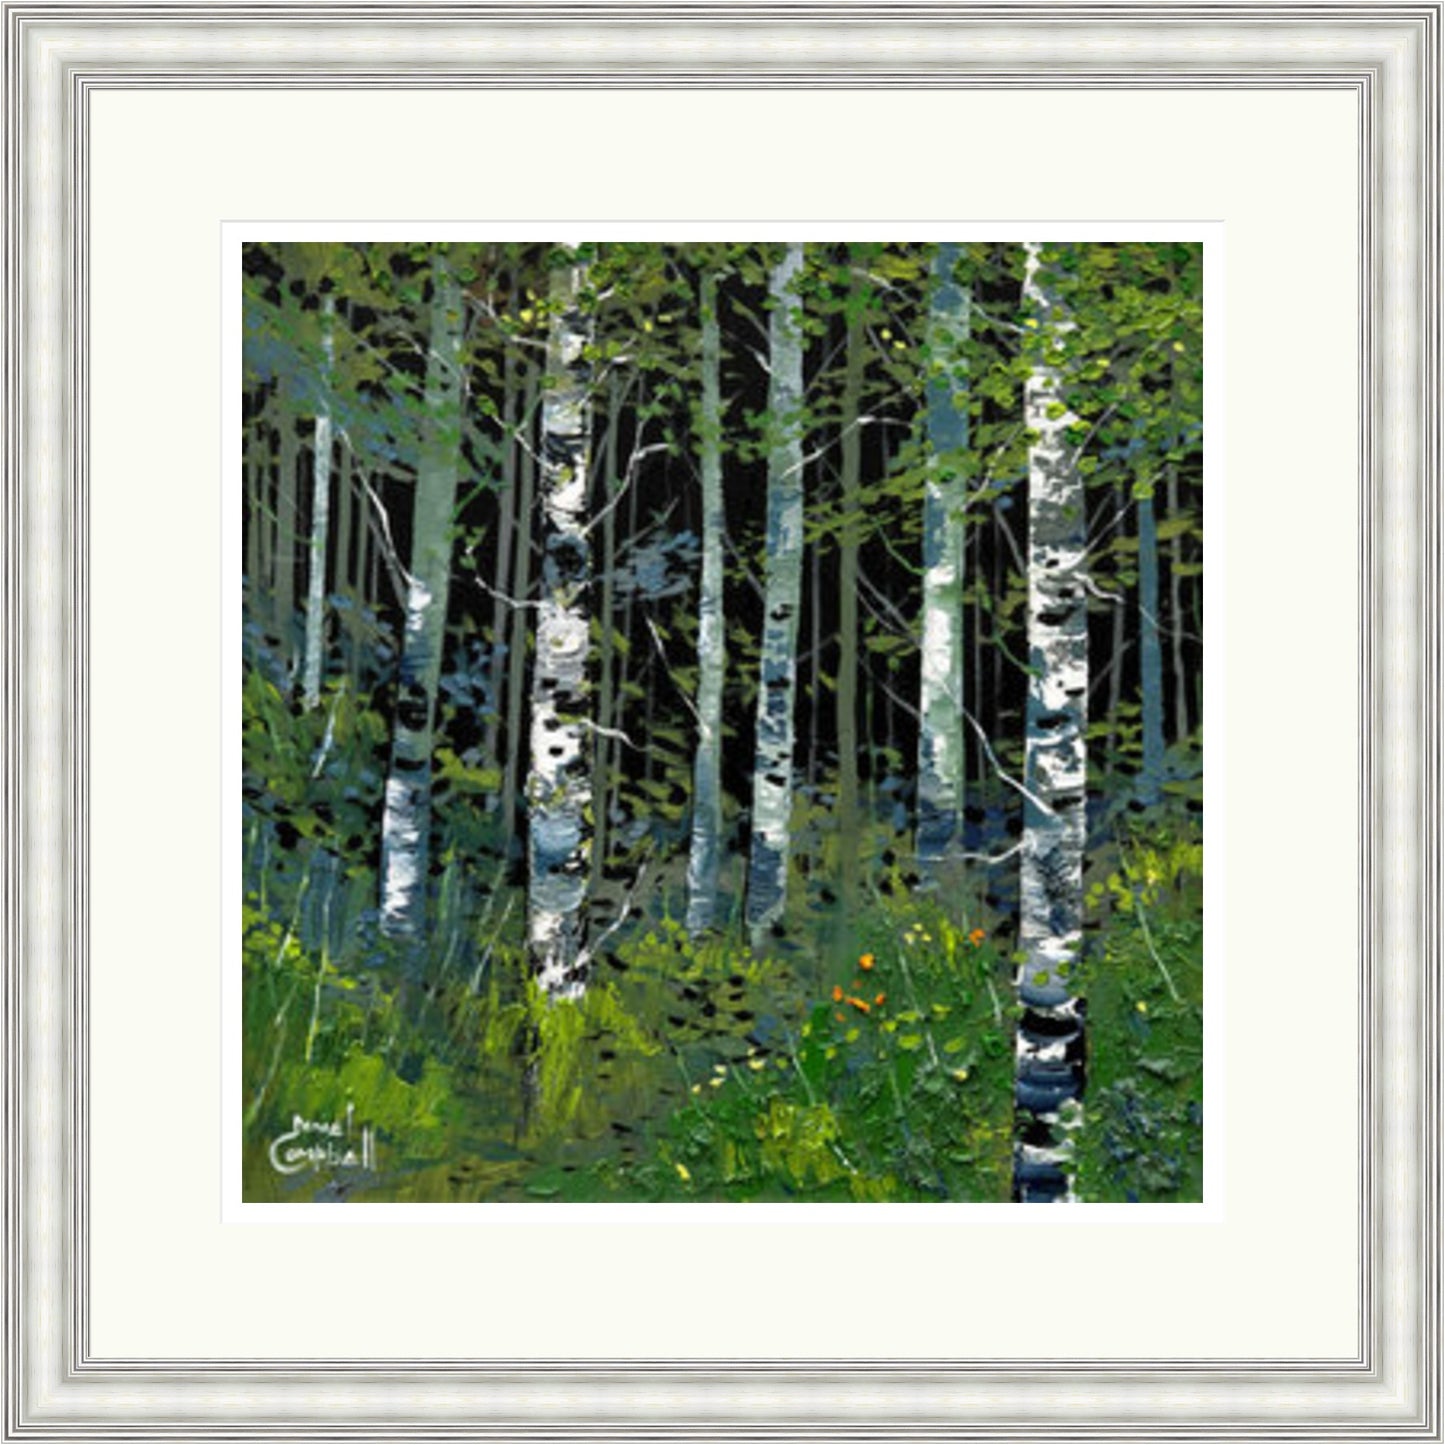 Silver Birches in Summer by Daniel Campbell